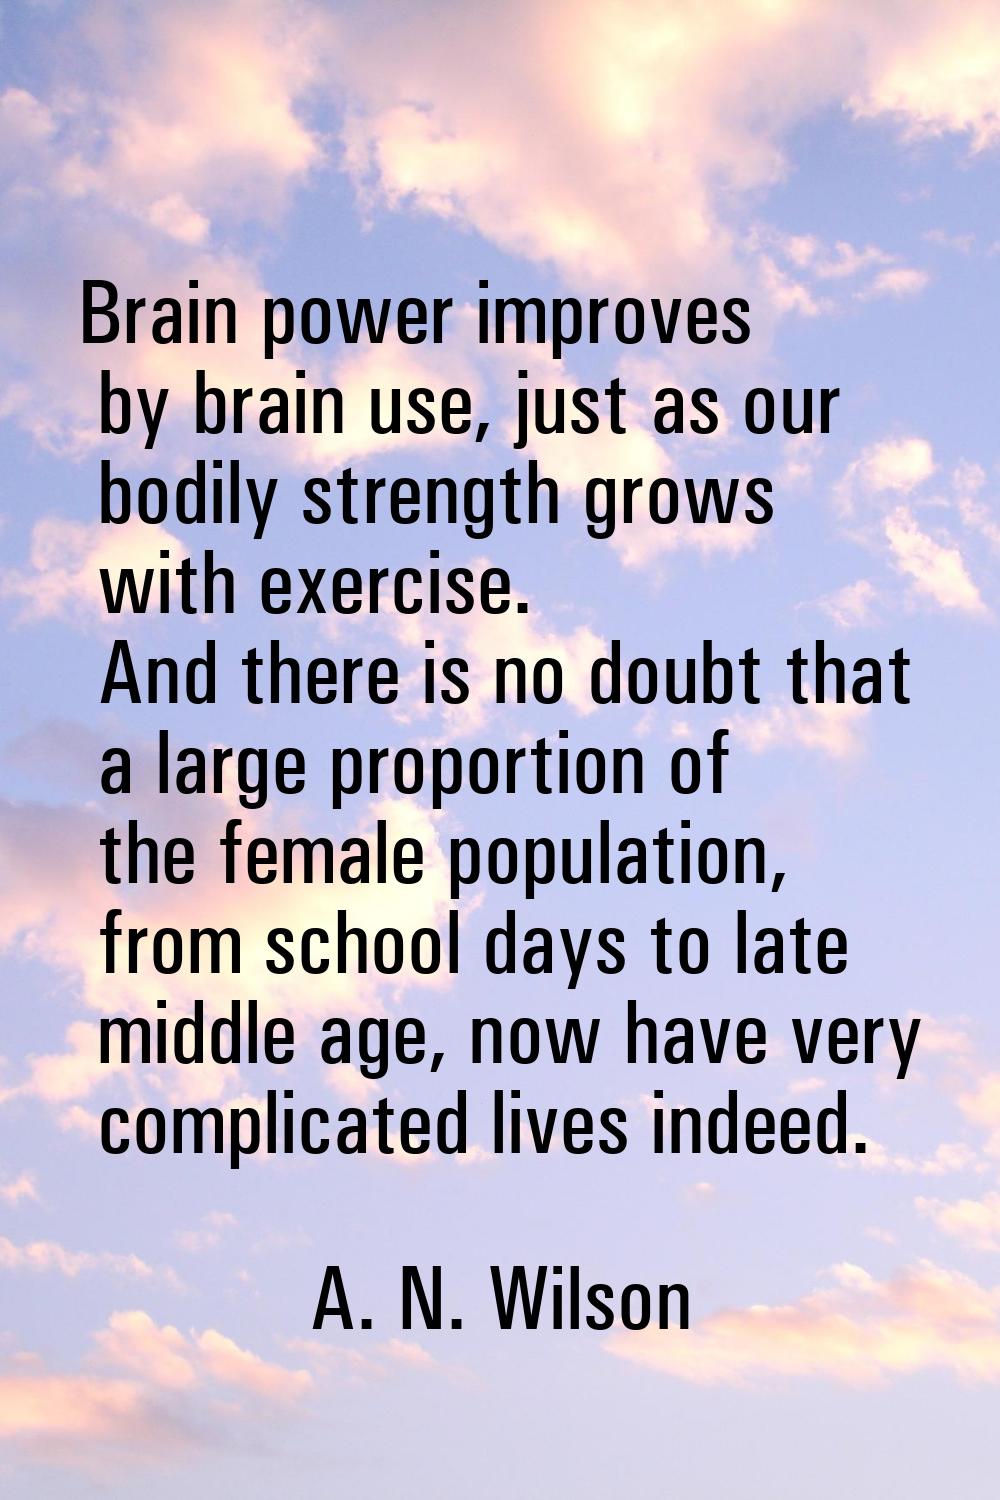 Brain power improves by brain use, just as our bodily strength grows with exercise. And there is no